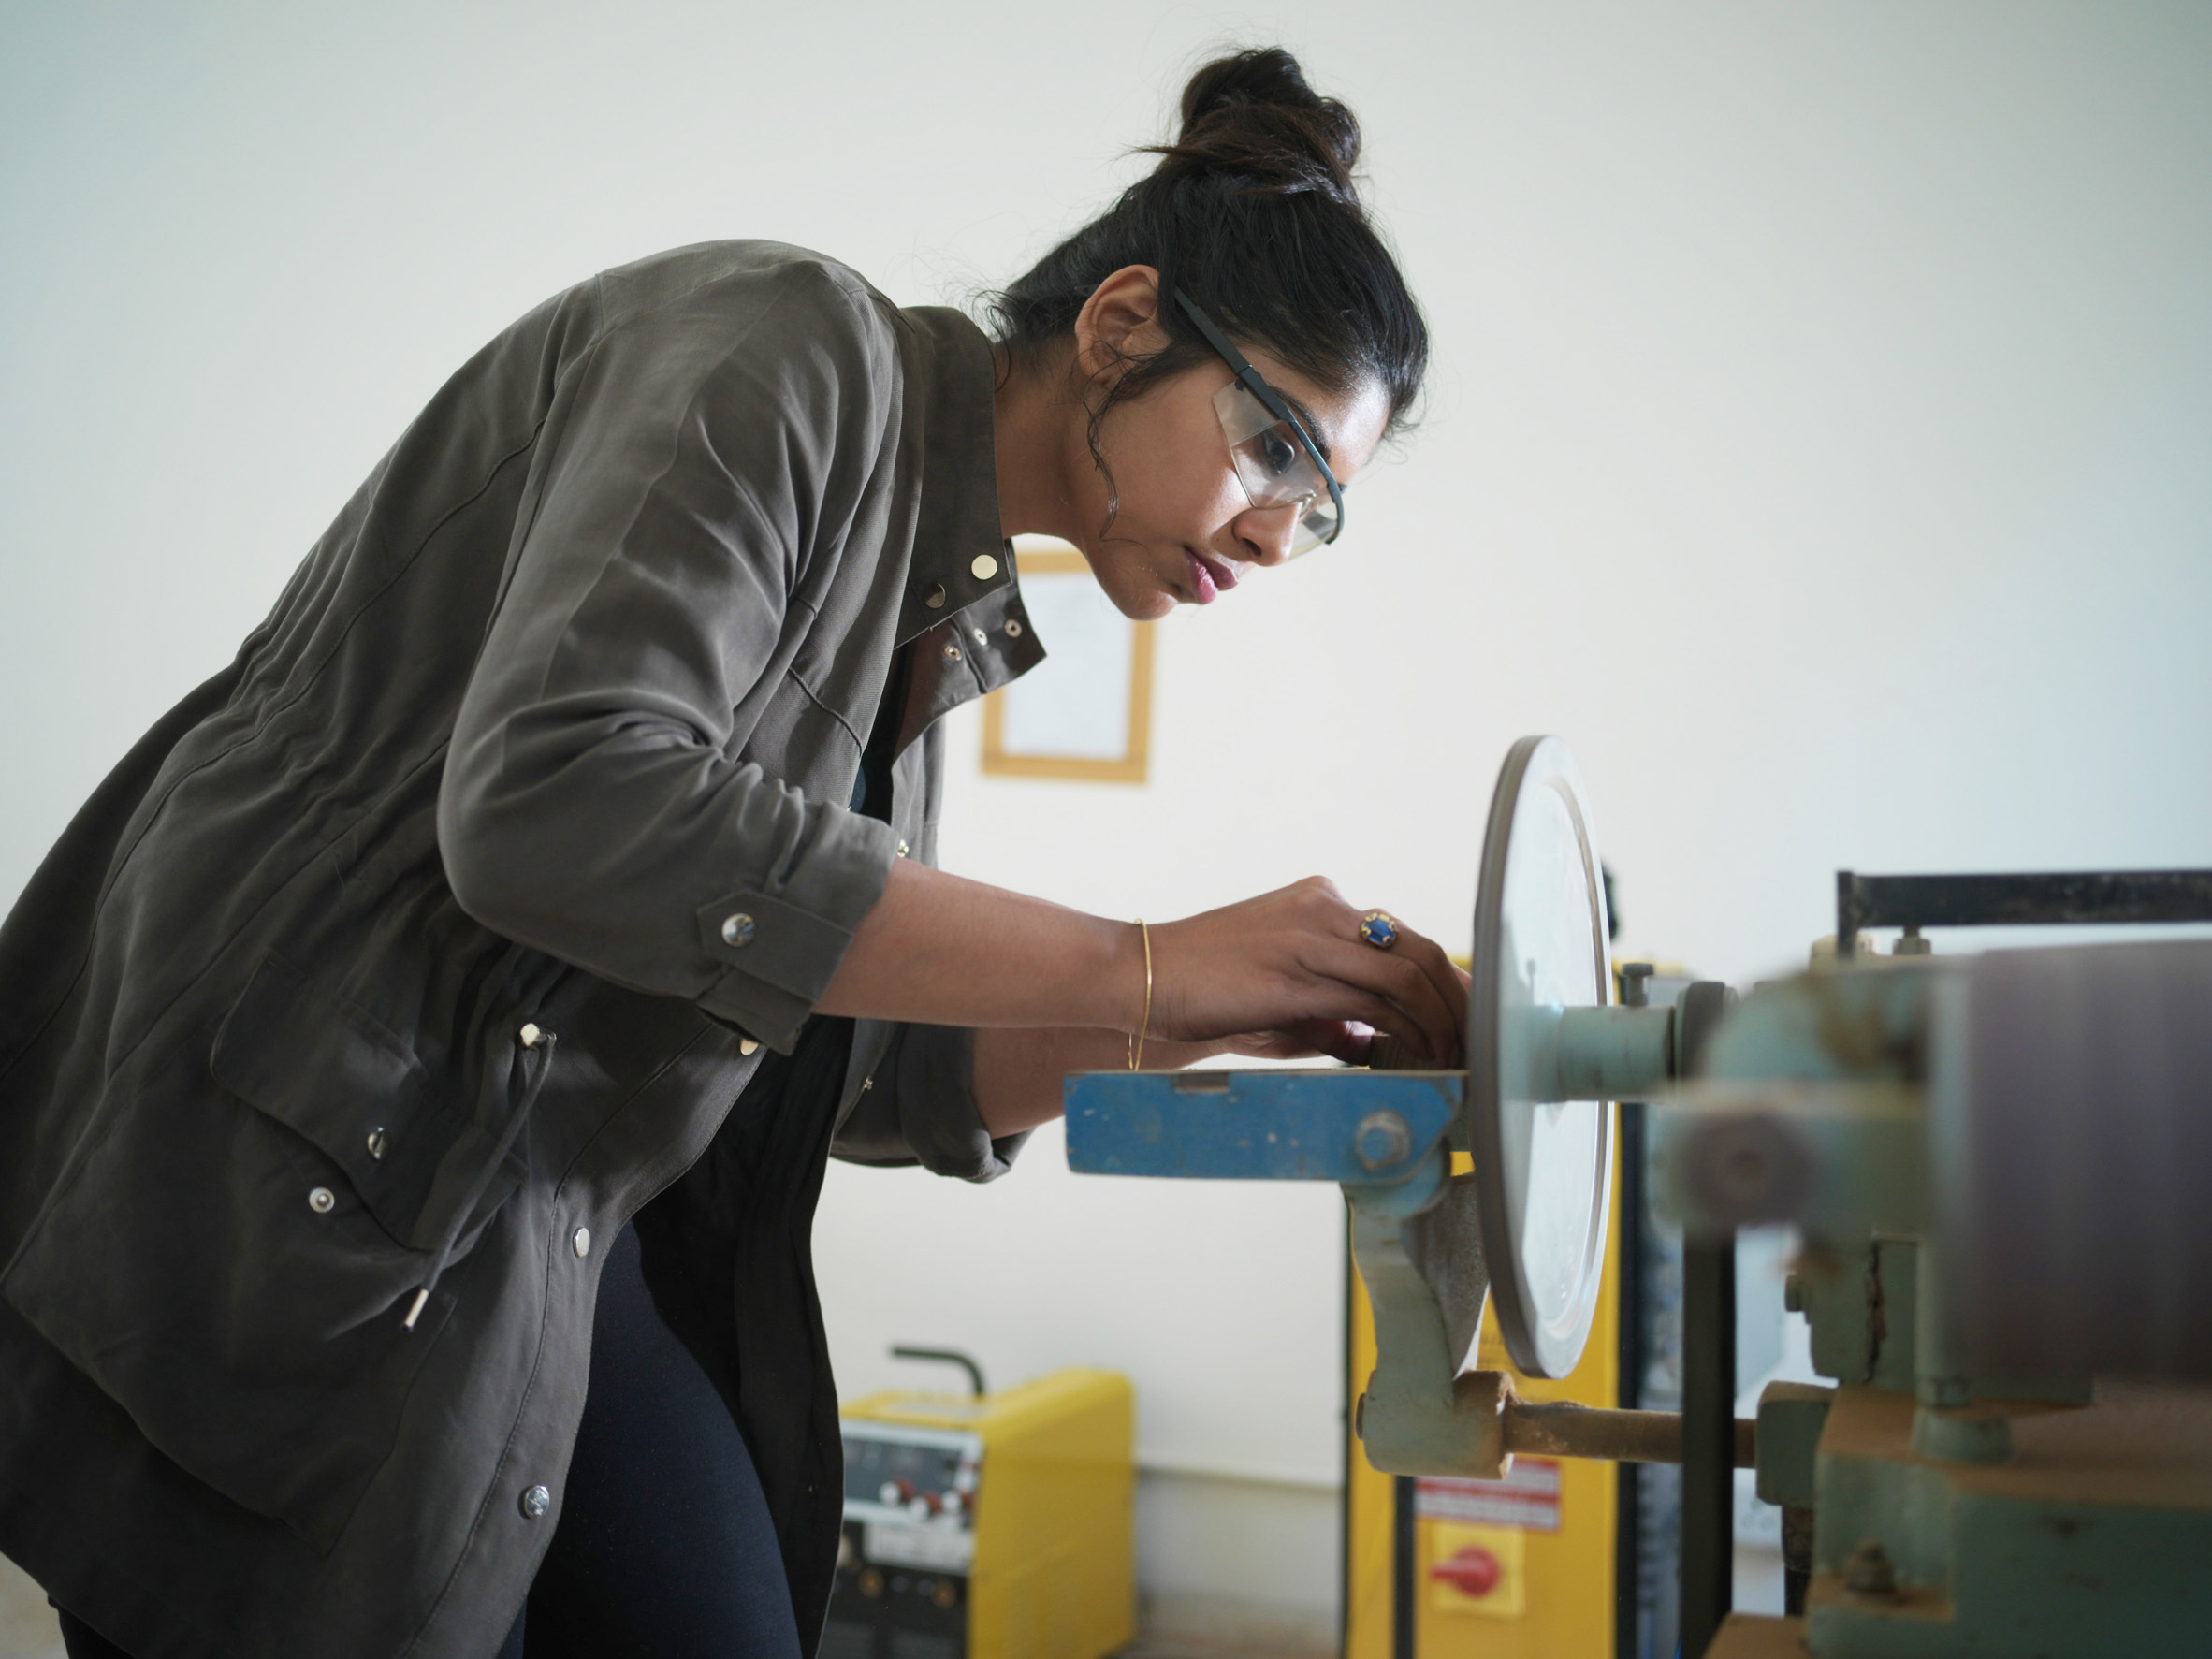 A Pearl Academy design student operating a machine